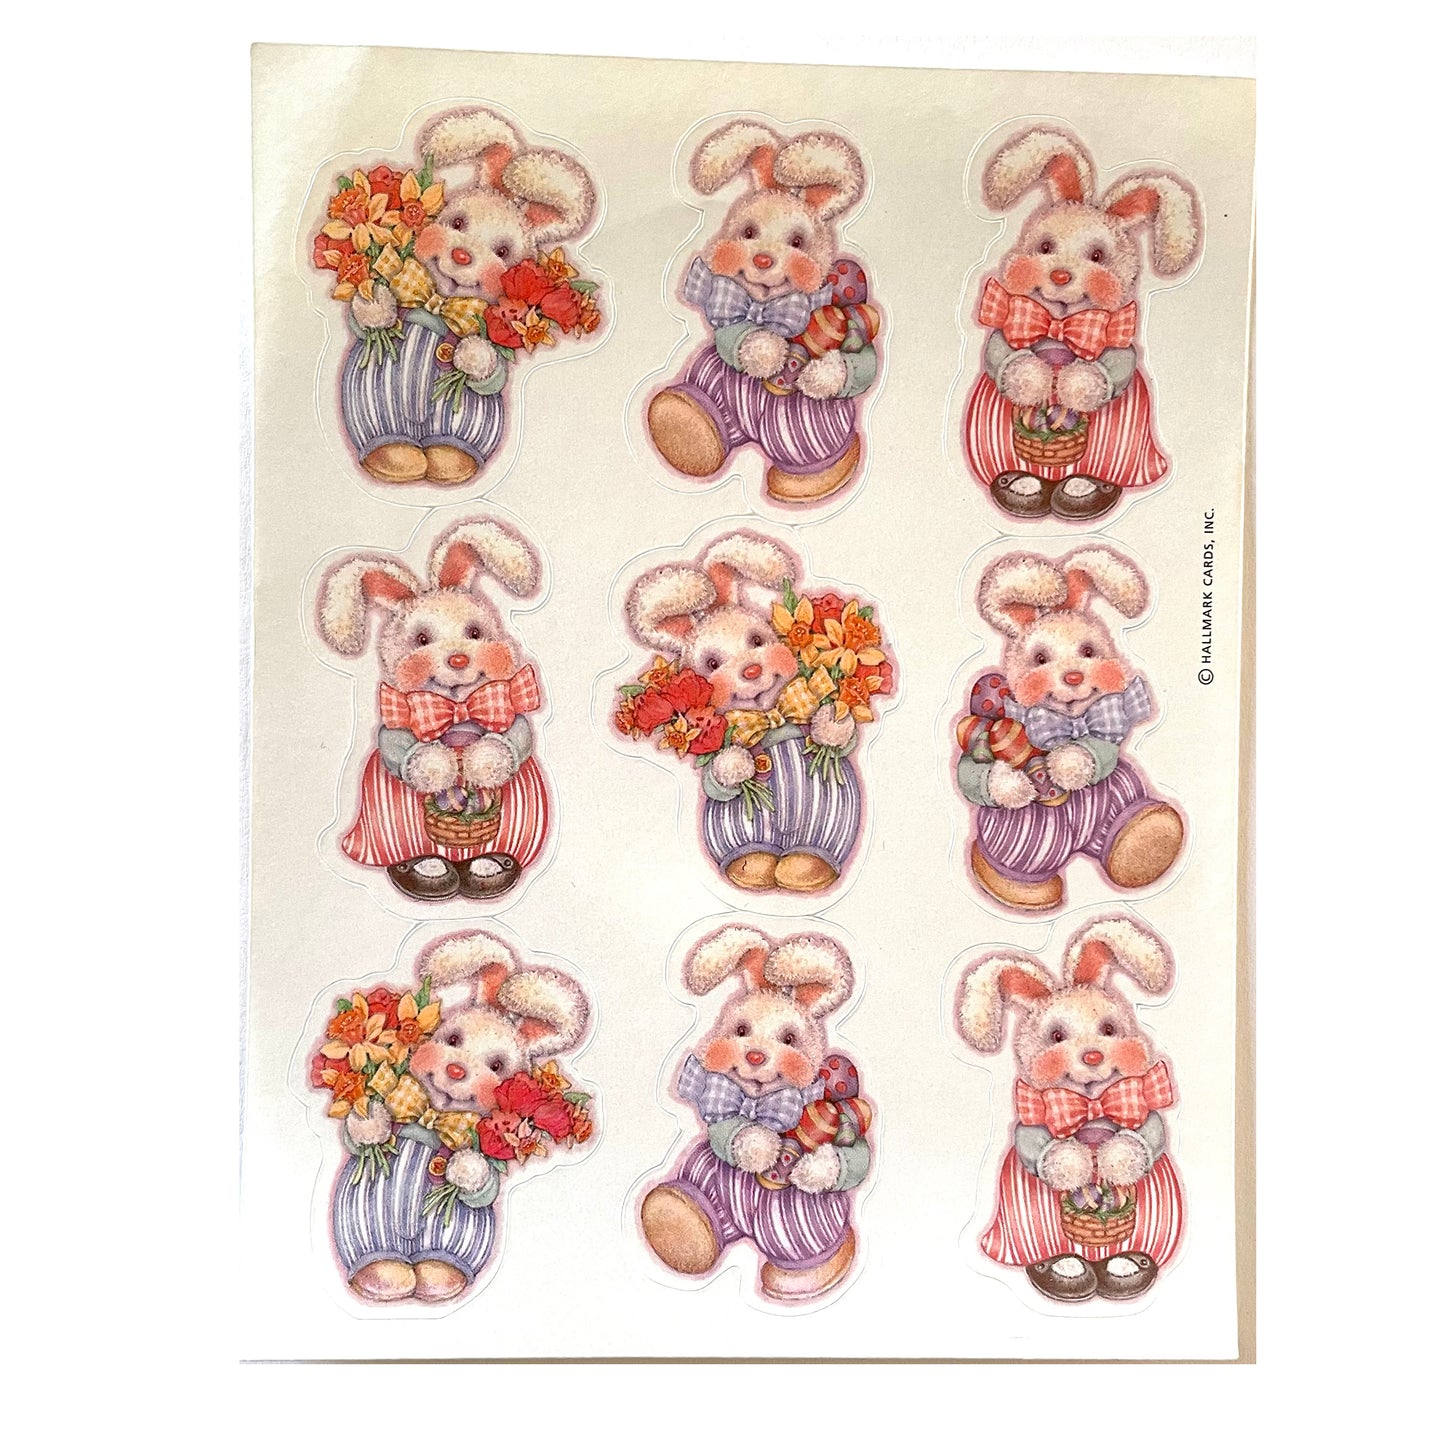 HALLMARK: Easter Rabbits with Gifts Stickers